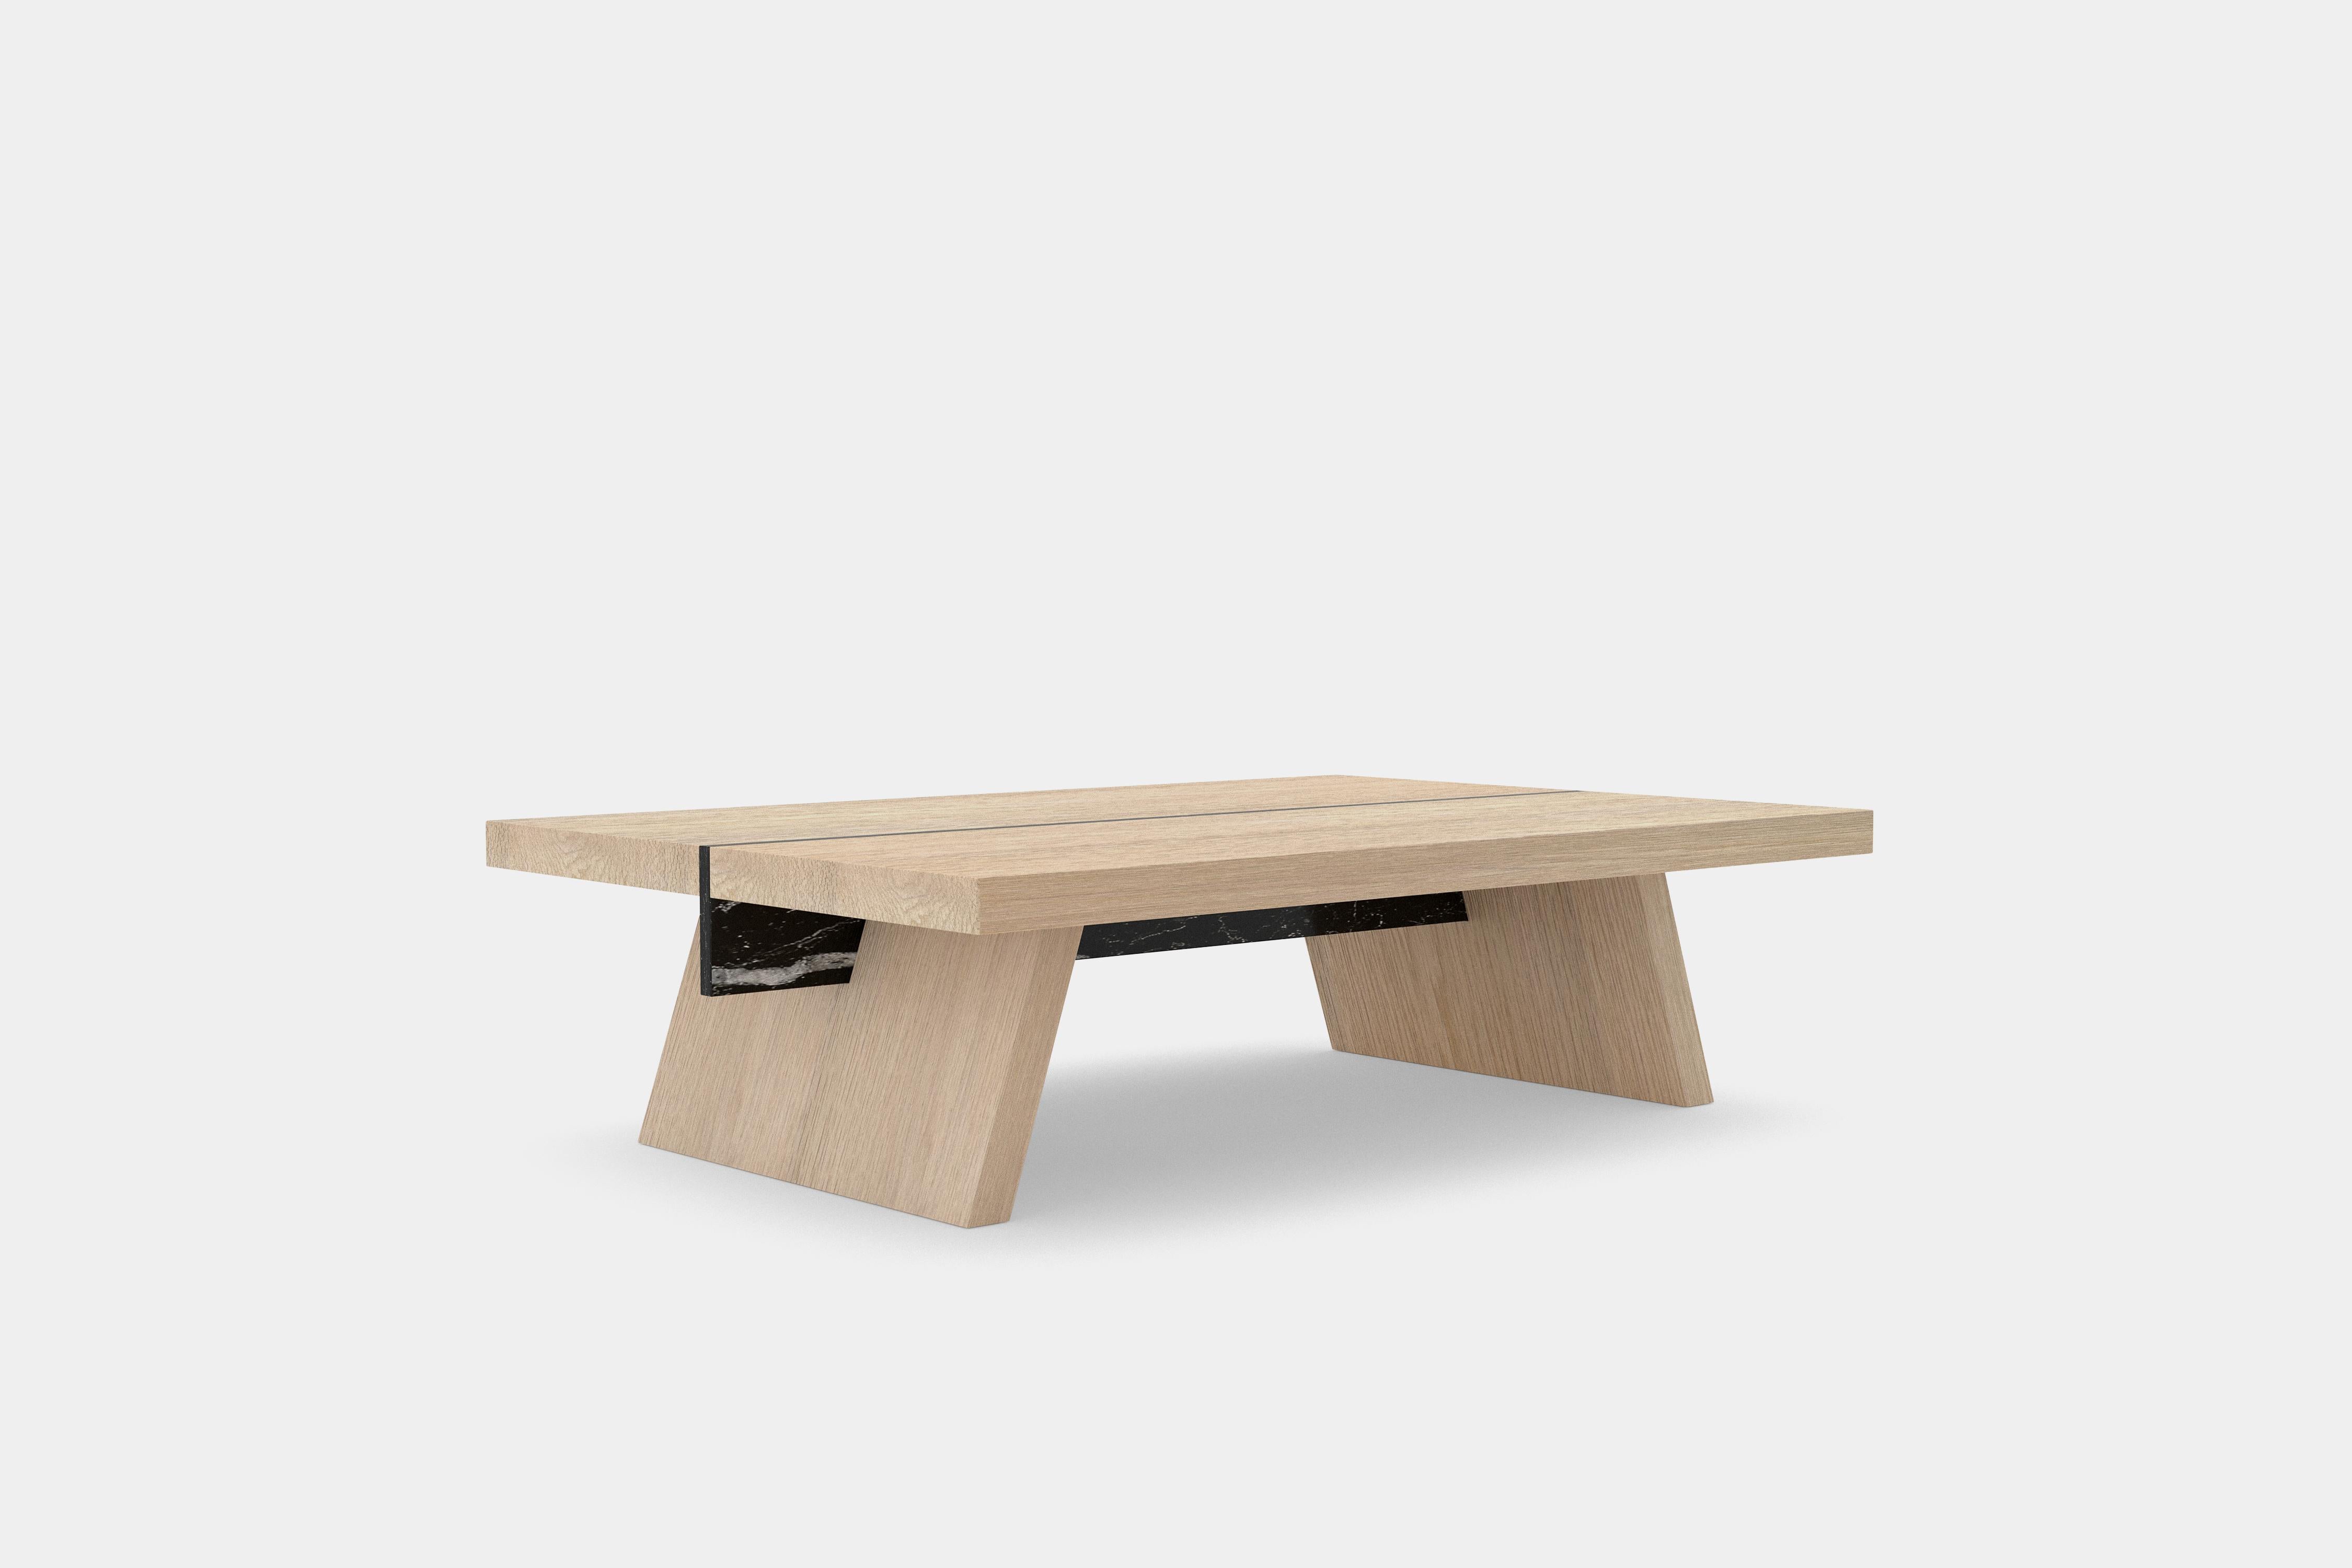 Mexican Laws of Motion Rectangular Coffee Table in Oak Solid Wood and Marble by NONO